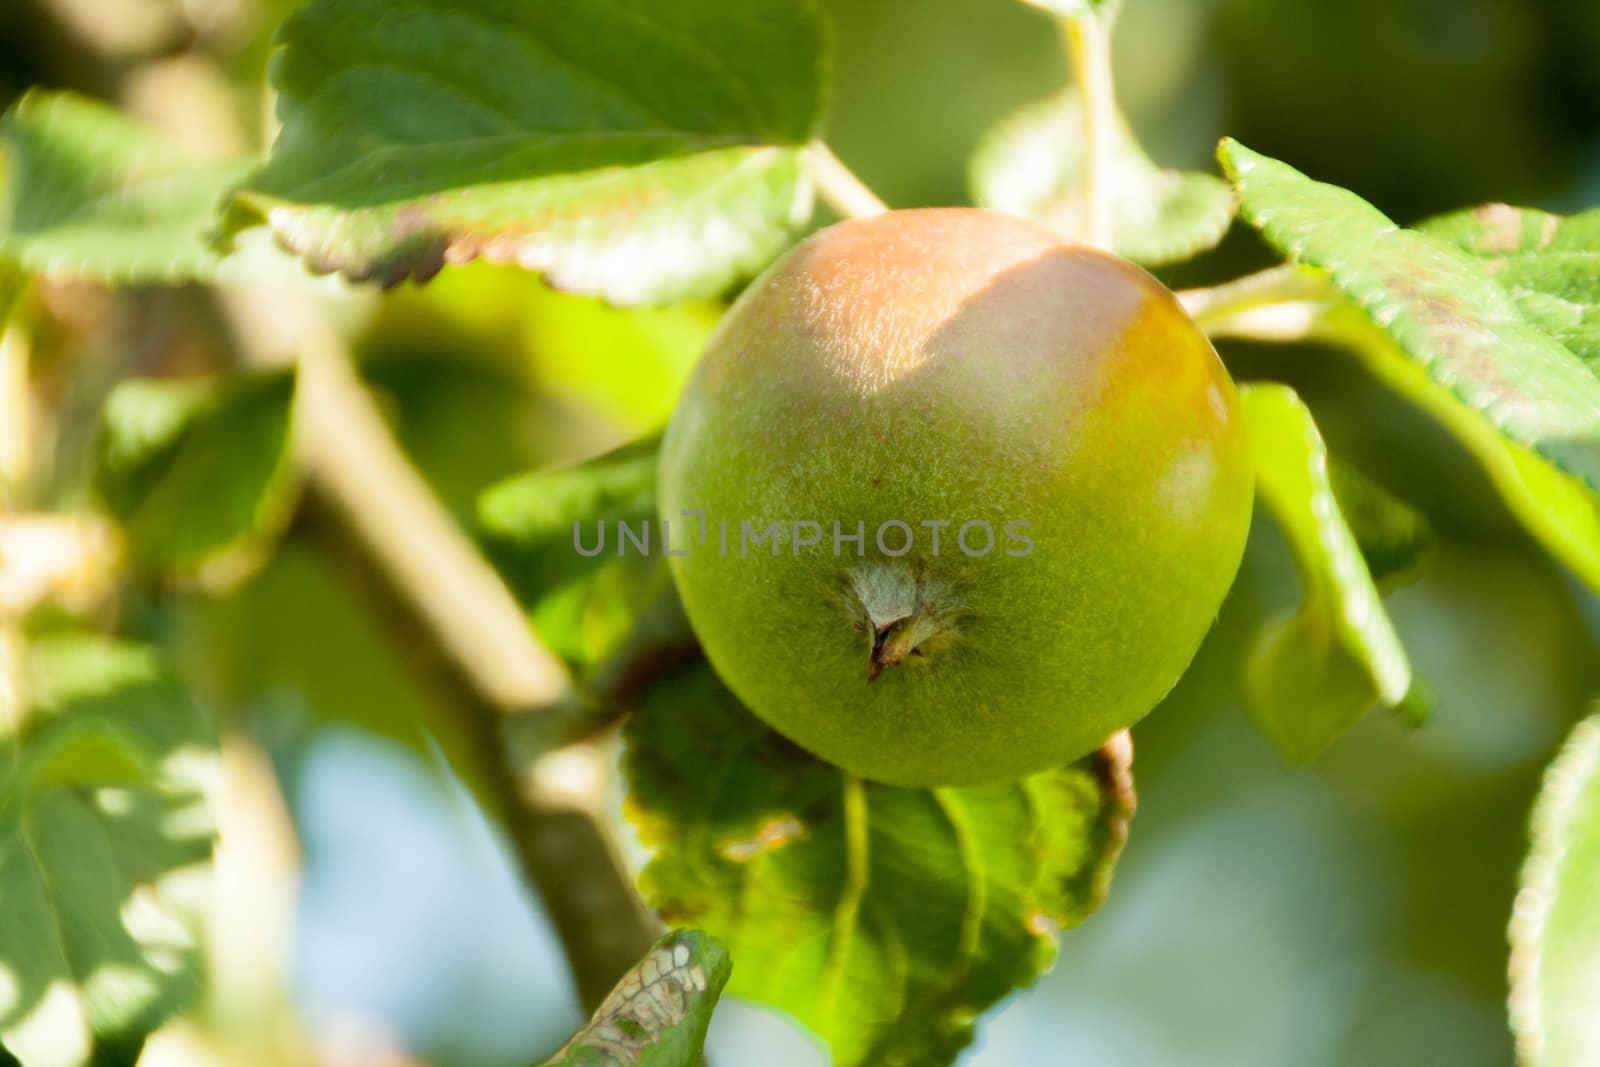 Green apples on a branch ready to be harvested, outdoors, selective focus